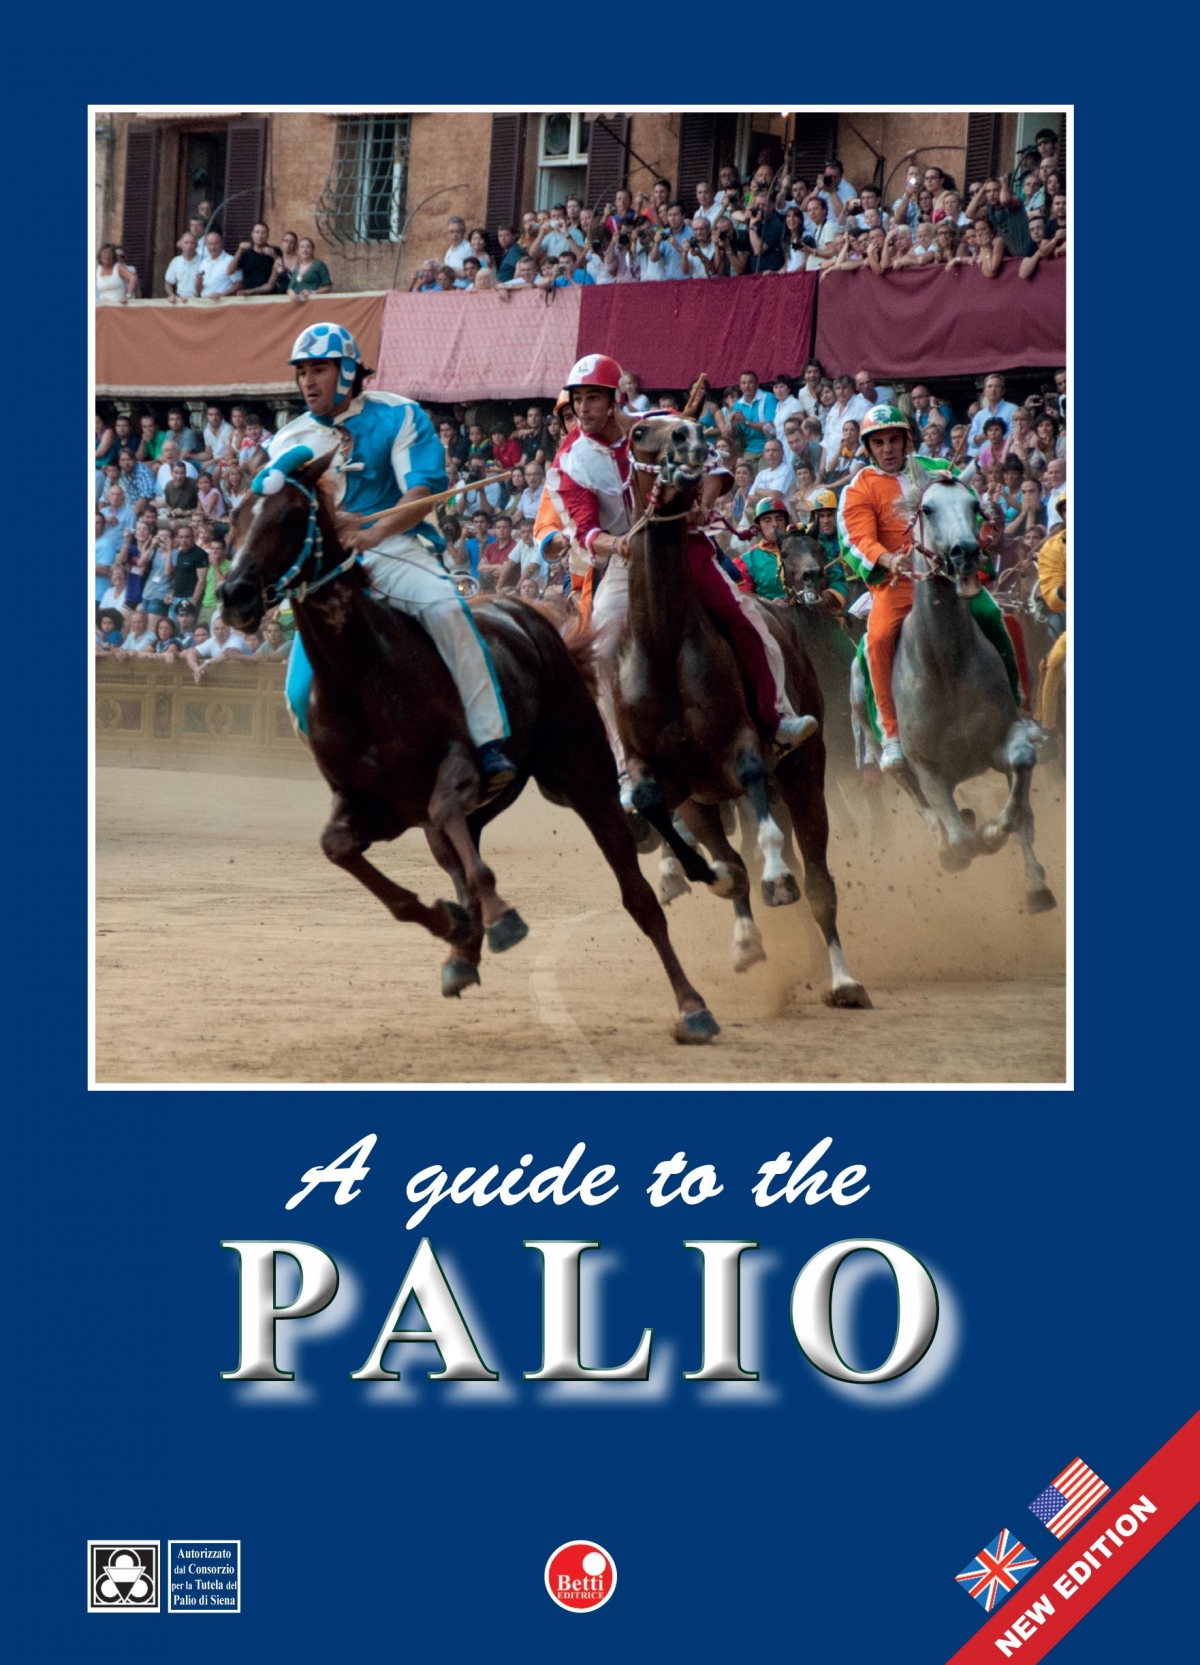 A guide to the Palio